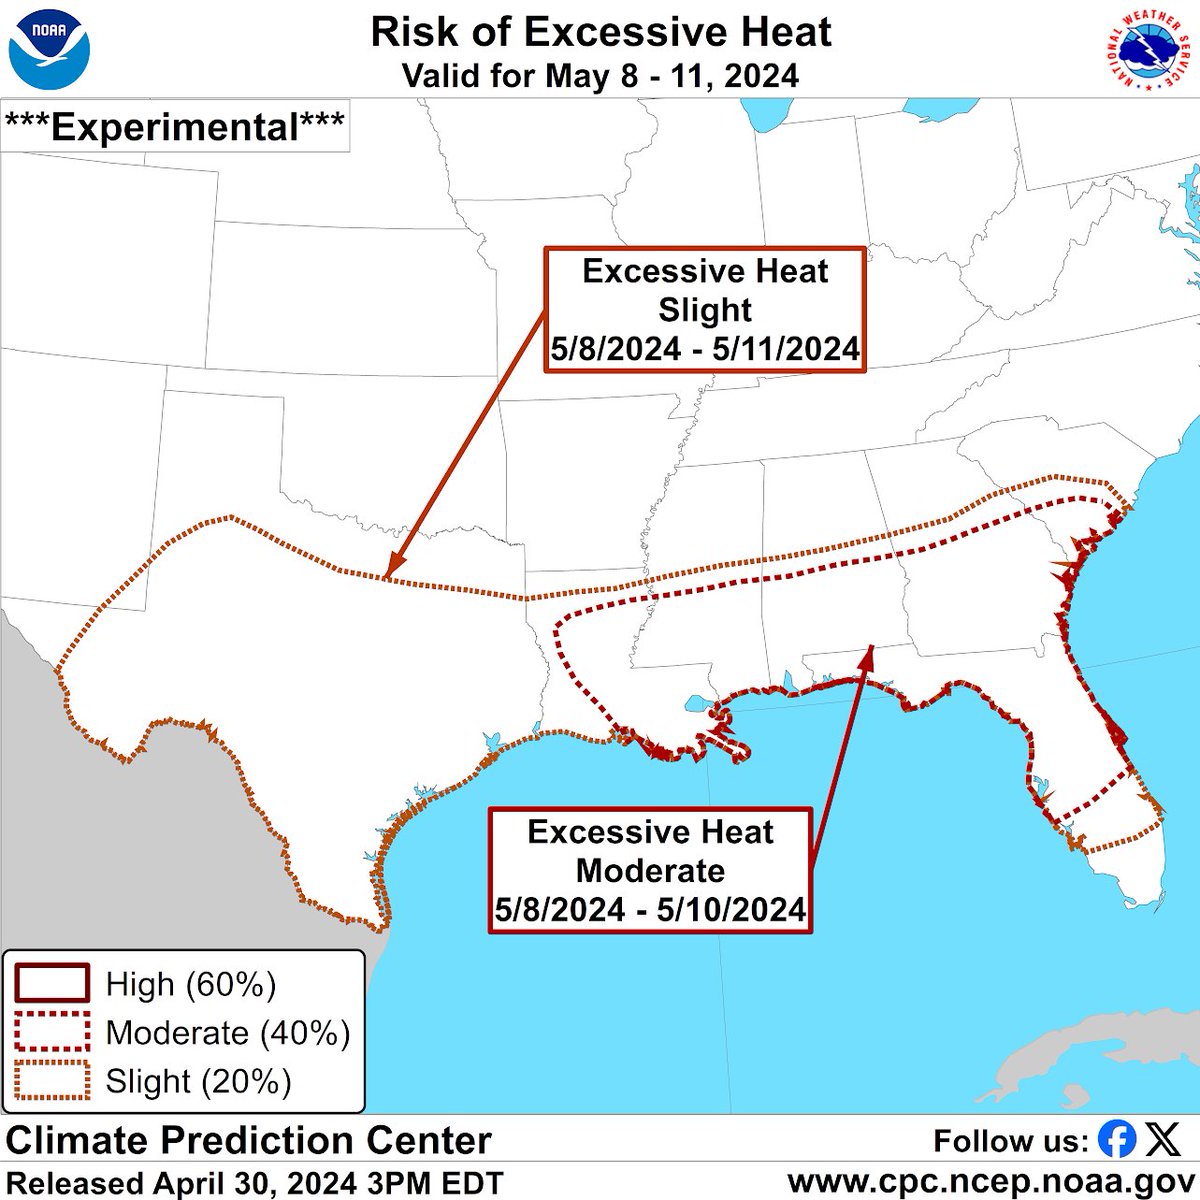 Hot, summer-like temperatures are expected to impact parts of the Gulf Coast states during the second week of May, with many locations possibly reaching record highs in the low to mid 90s May 8-10.